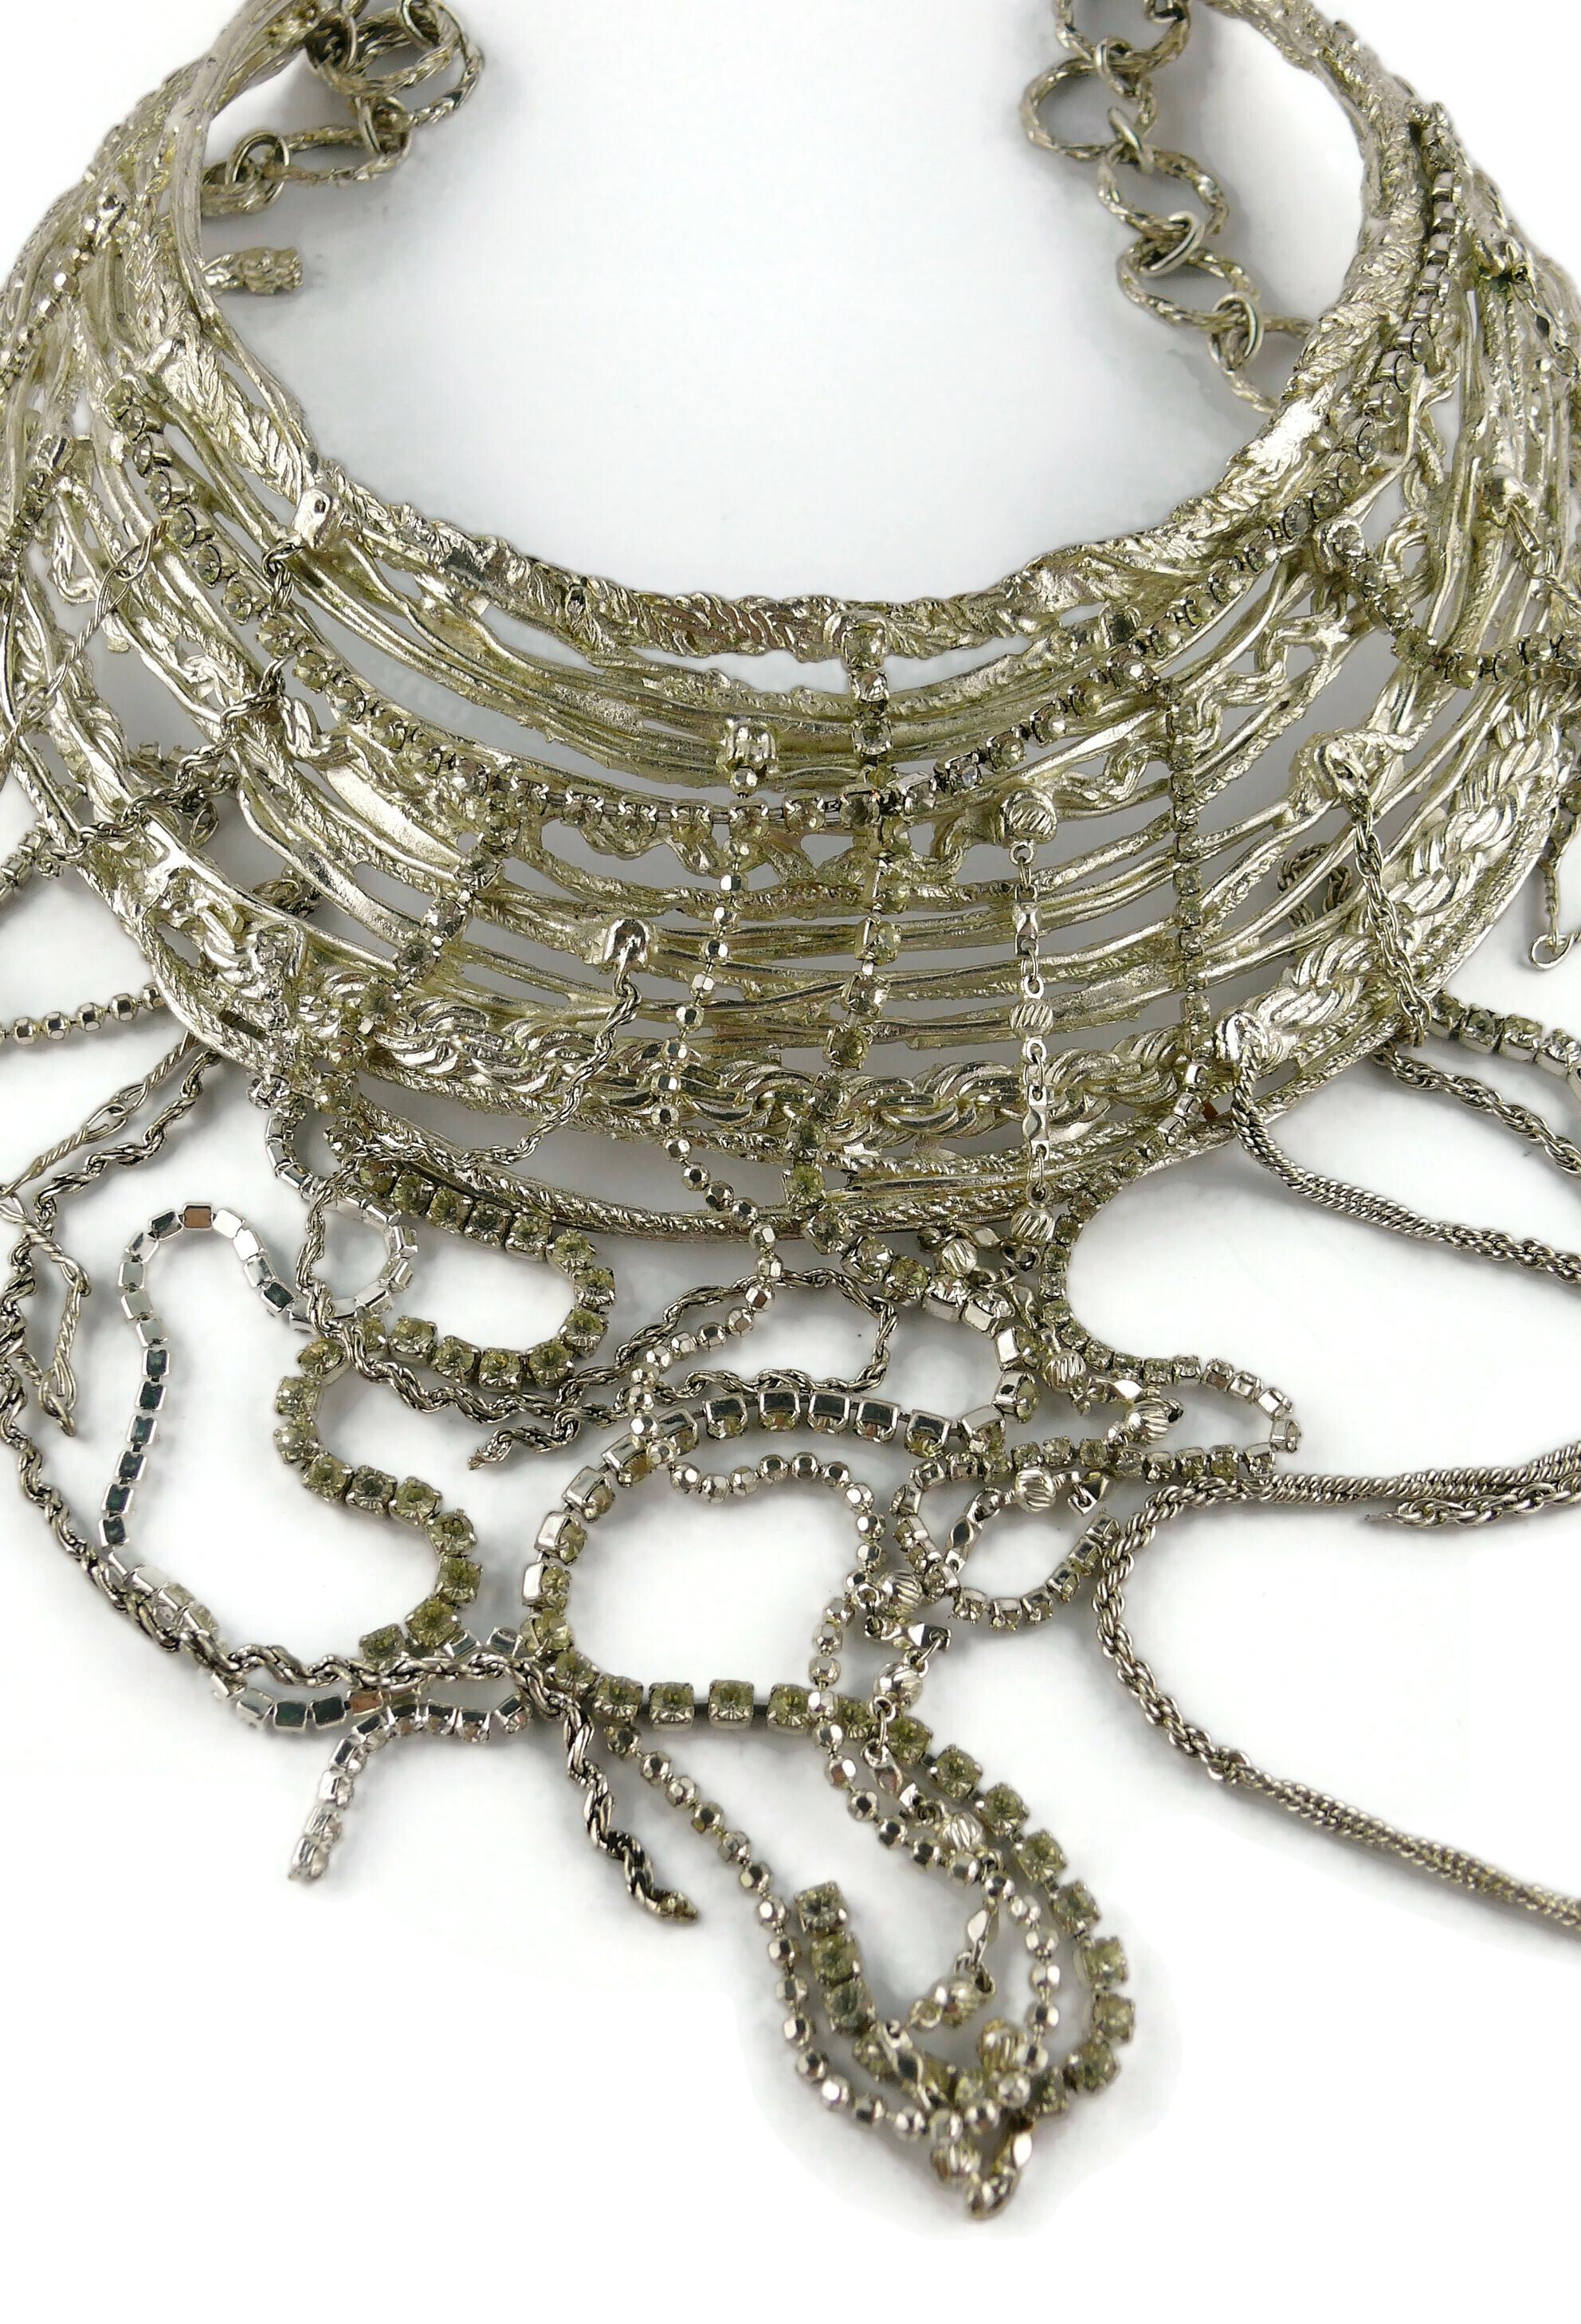 Christian Lacroix Vintage Jewelled Silver Toned Bib Necklace For Sale 2